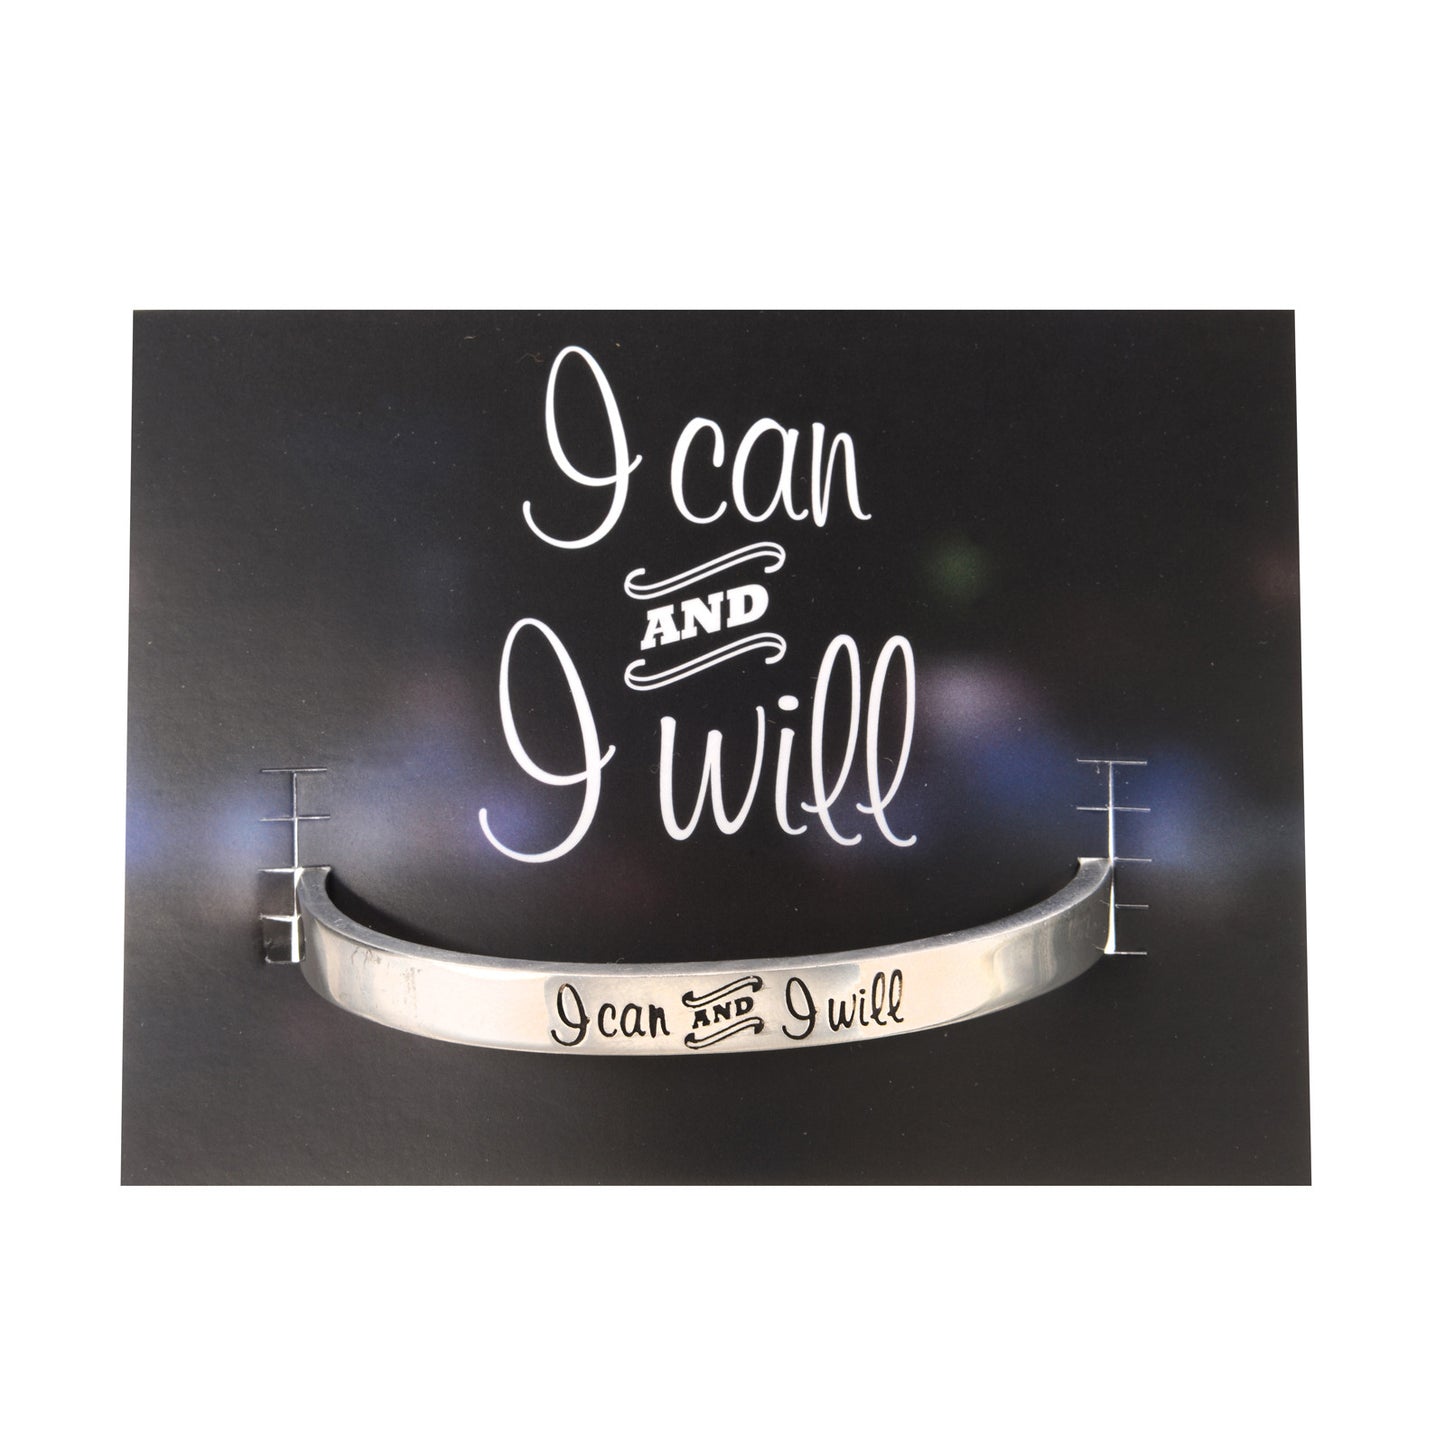 I Can and I Will Quotable Cuff Bracelet on backer card